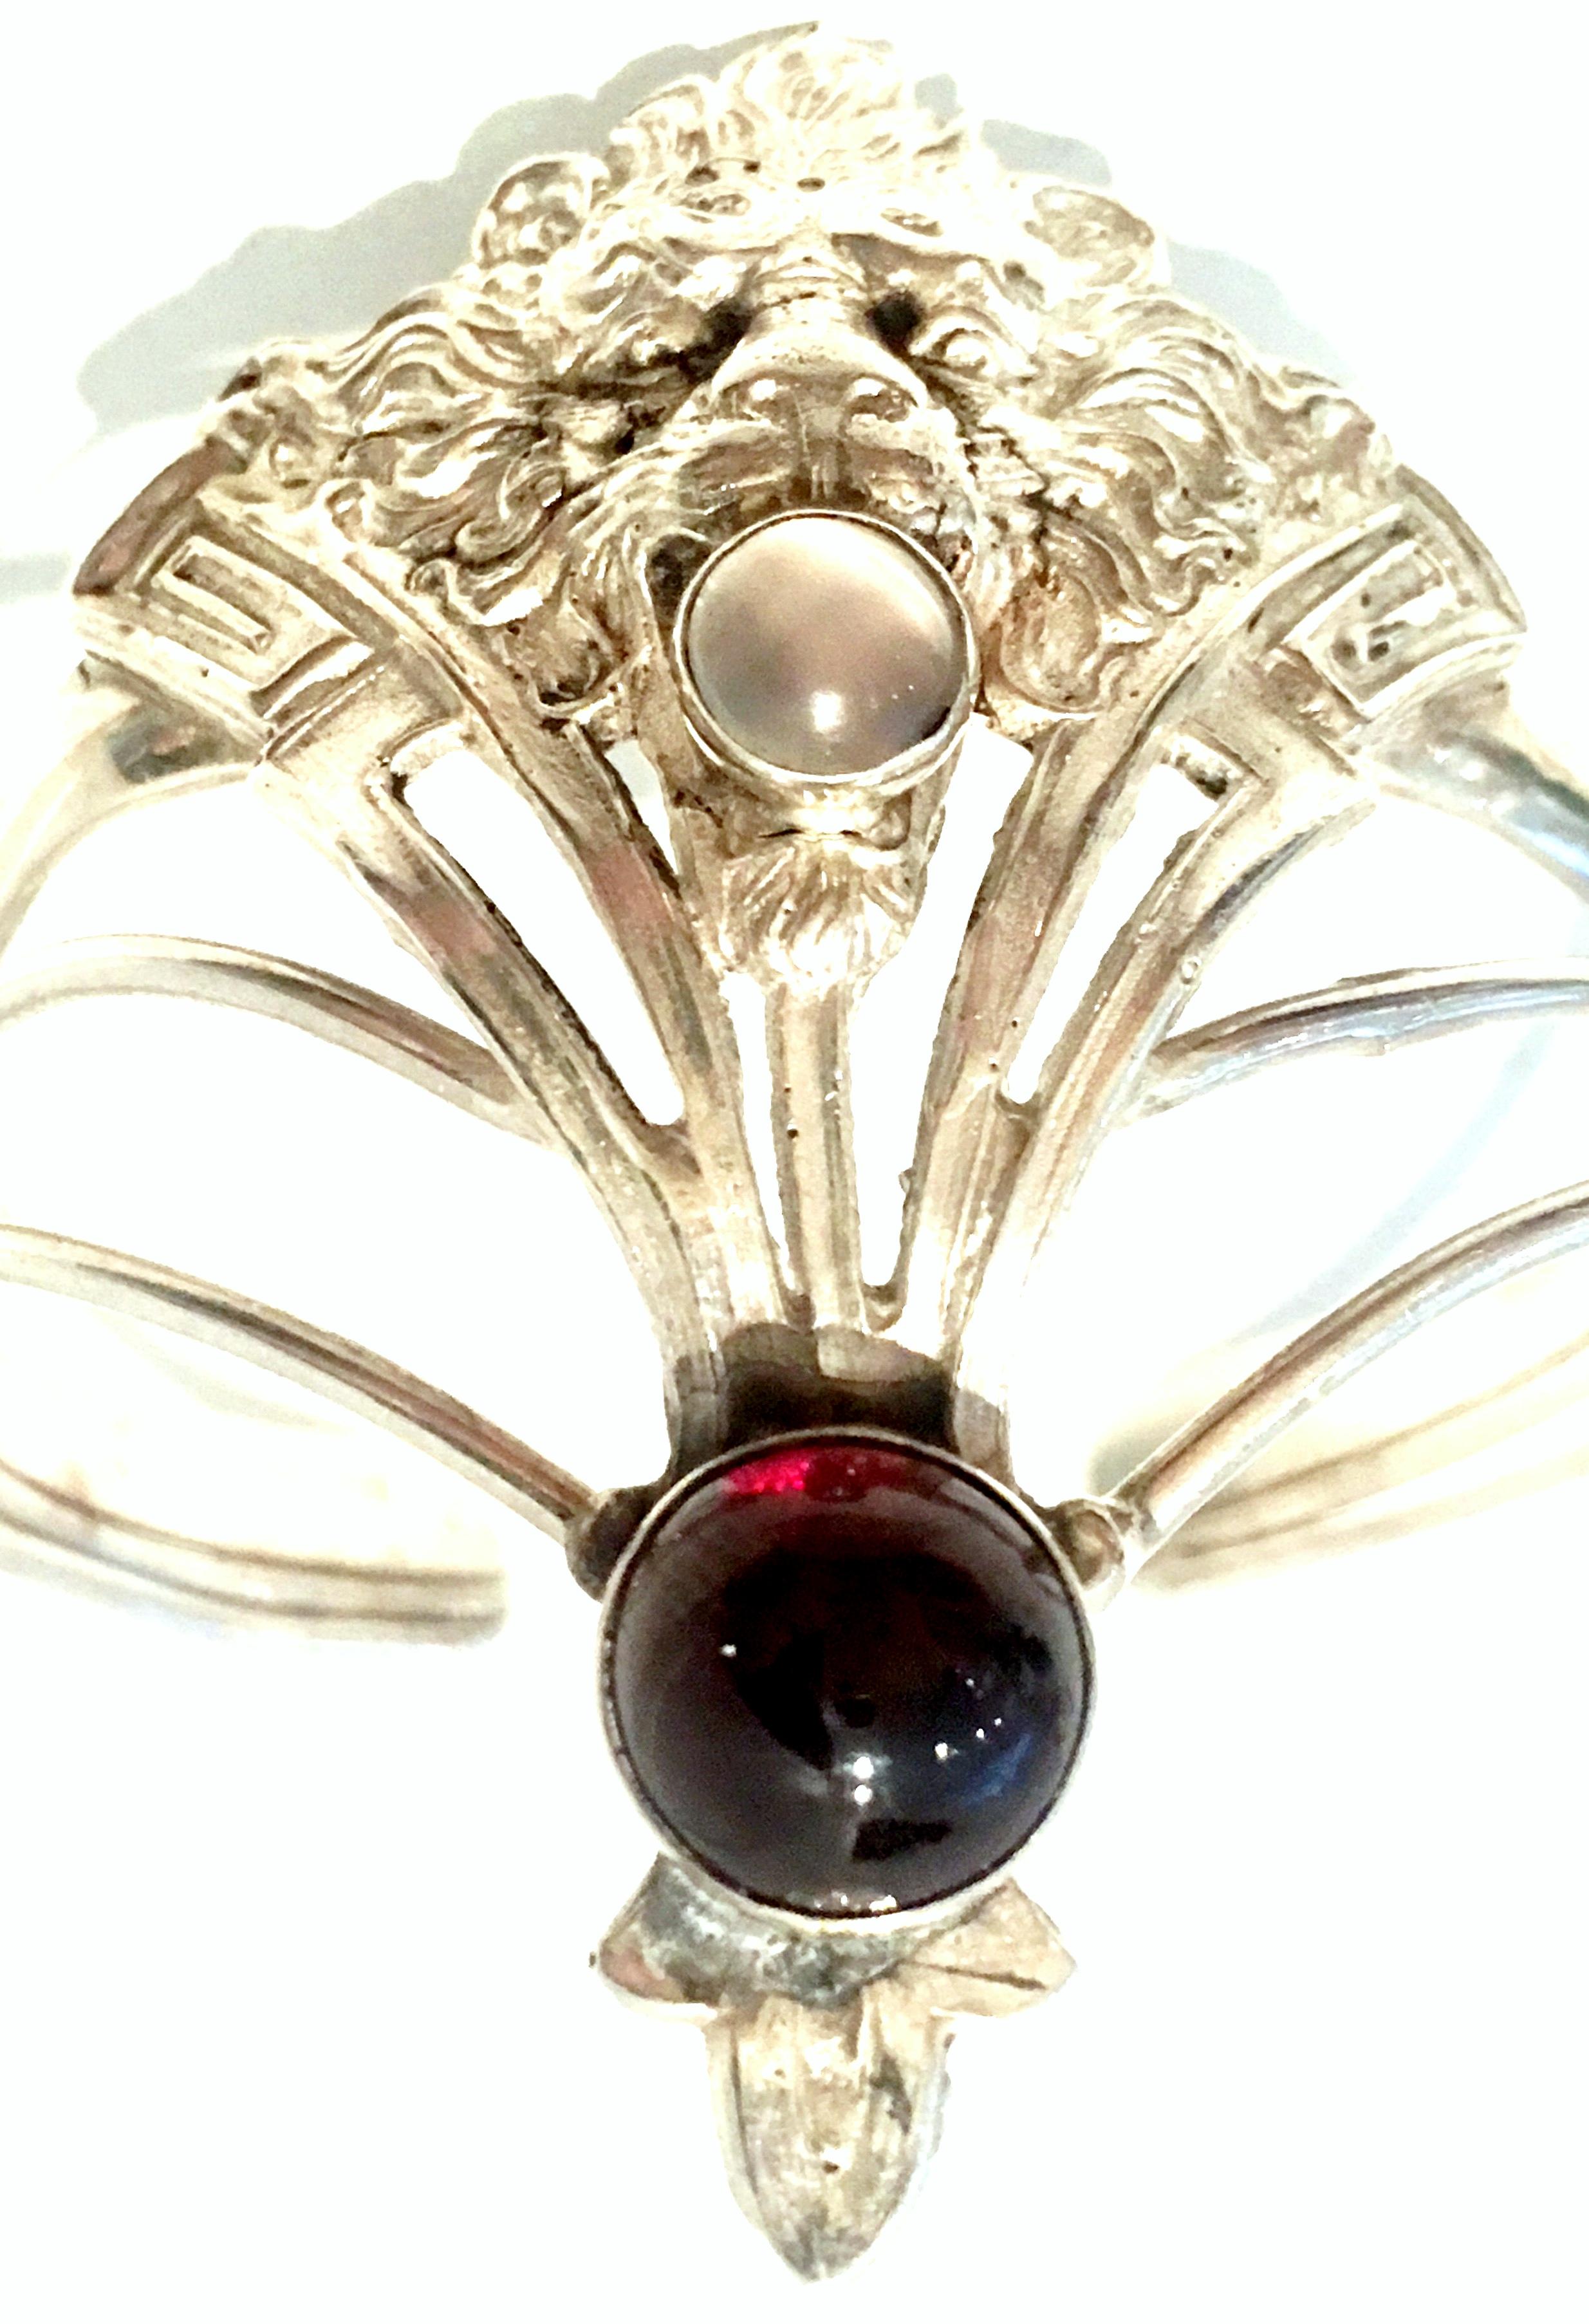 20th Century Art Nouveau Sterling Garnet & Moonstone Cuff Bracelet By, Giampaoli In Good Condition For Sale In West Palm Beach, FL